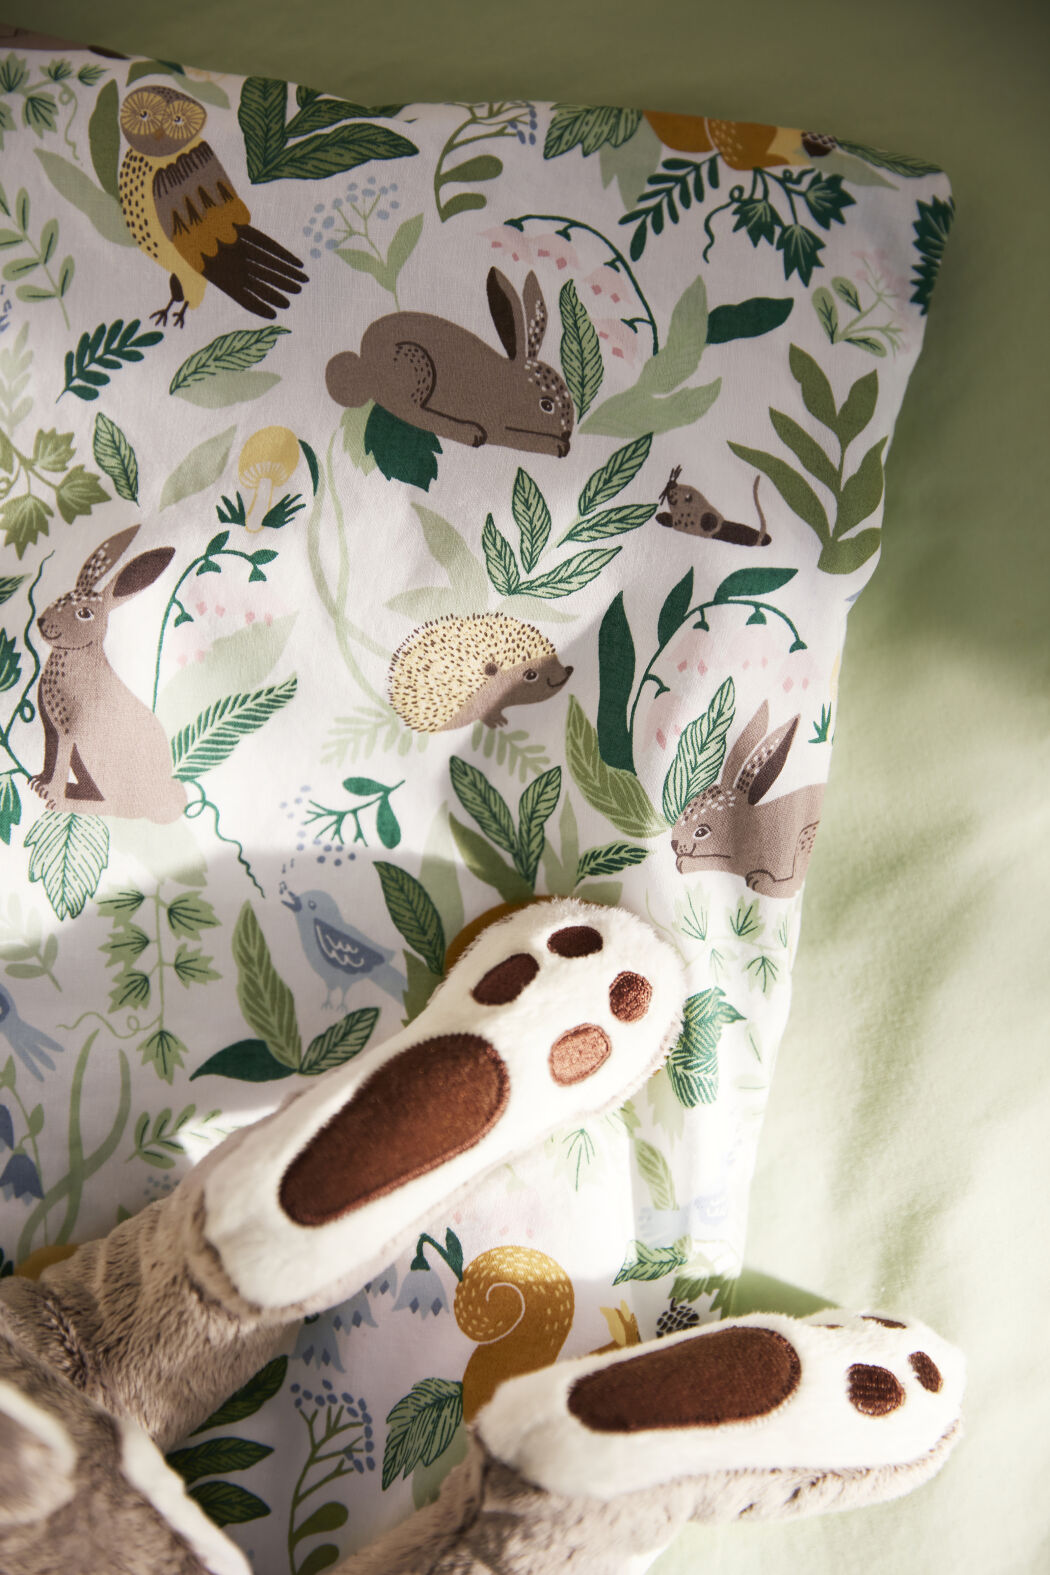 Nature animal pattern for a home deco collection by Malin Gyllensvaan